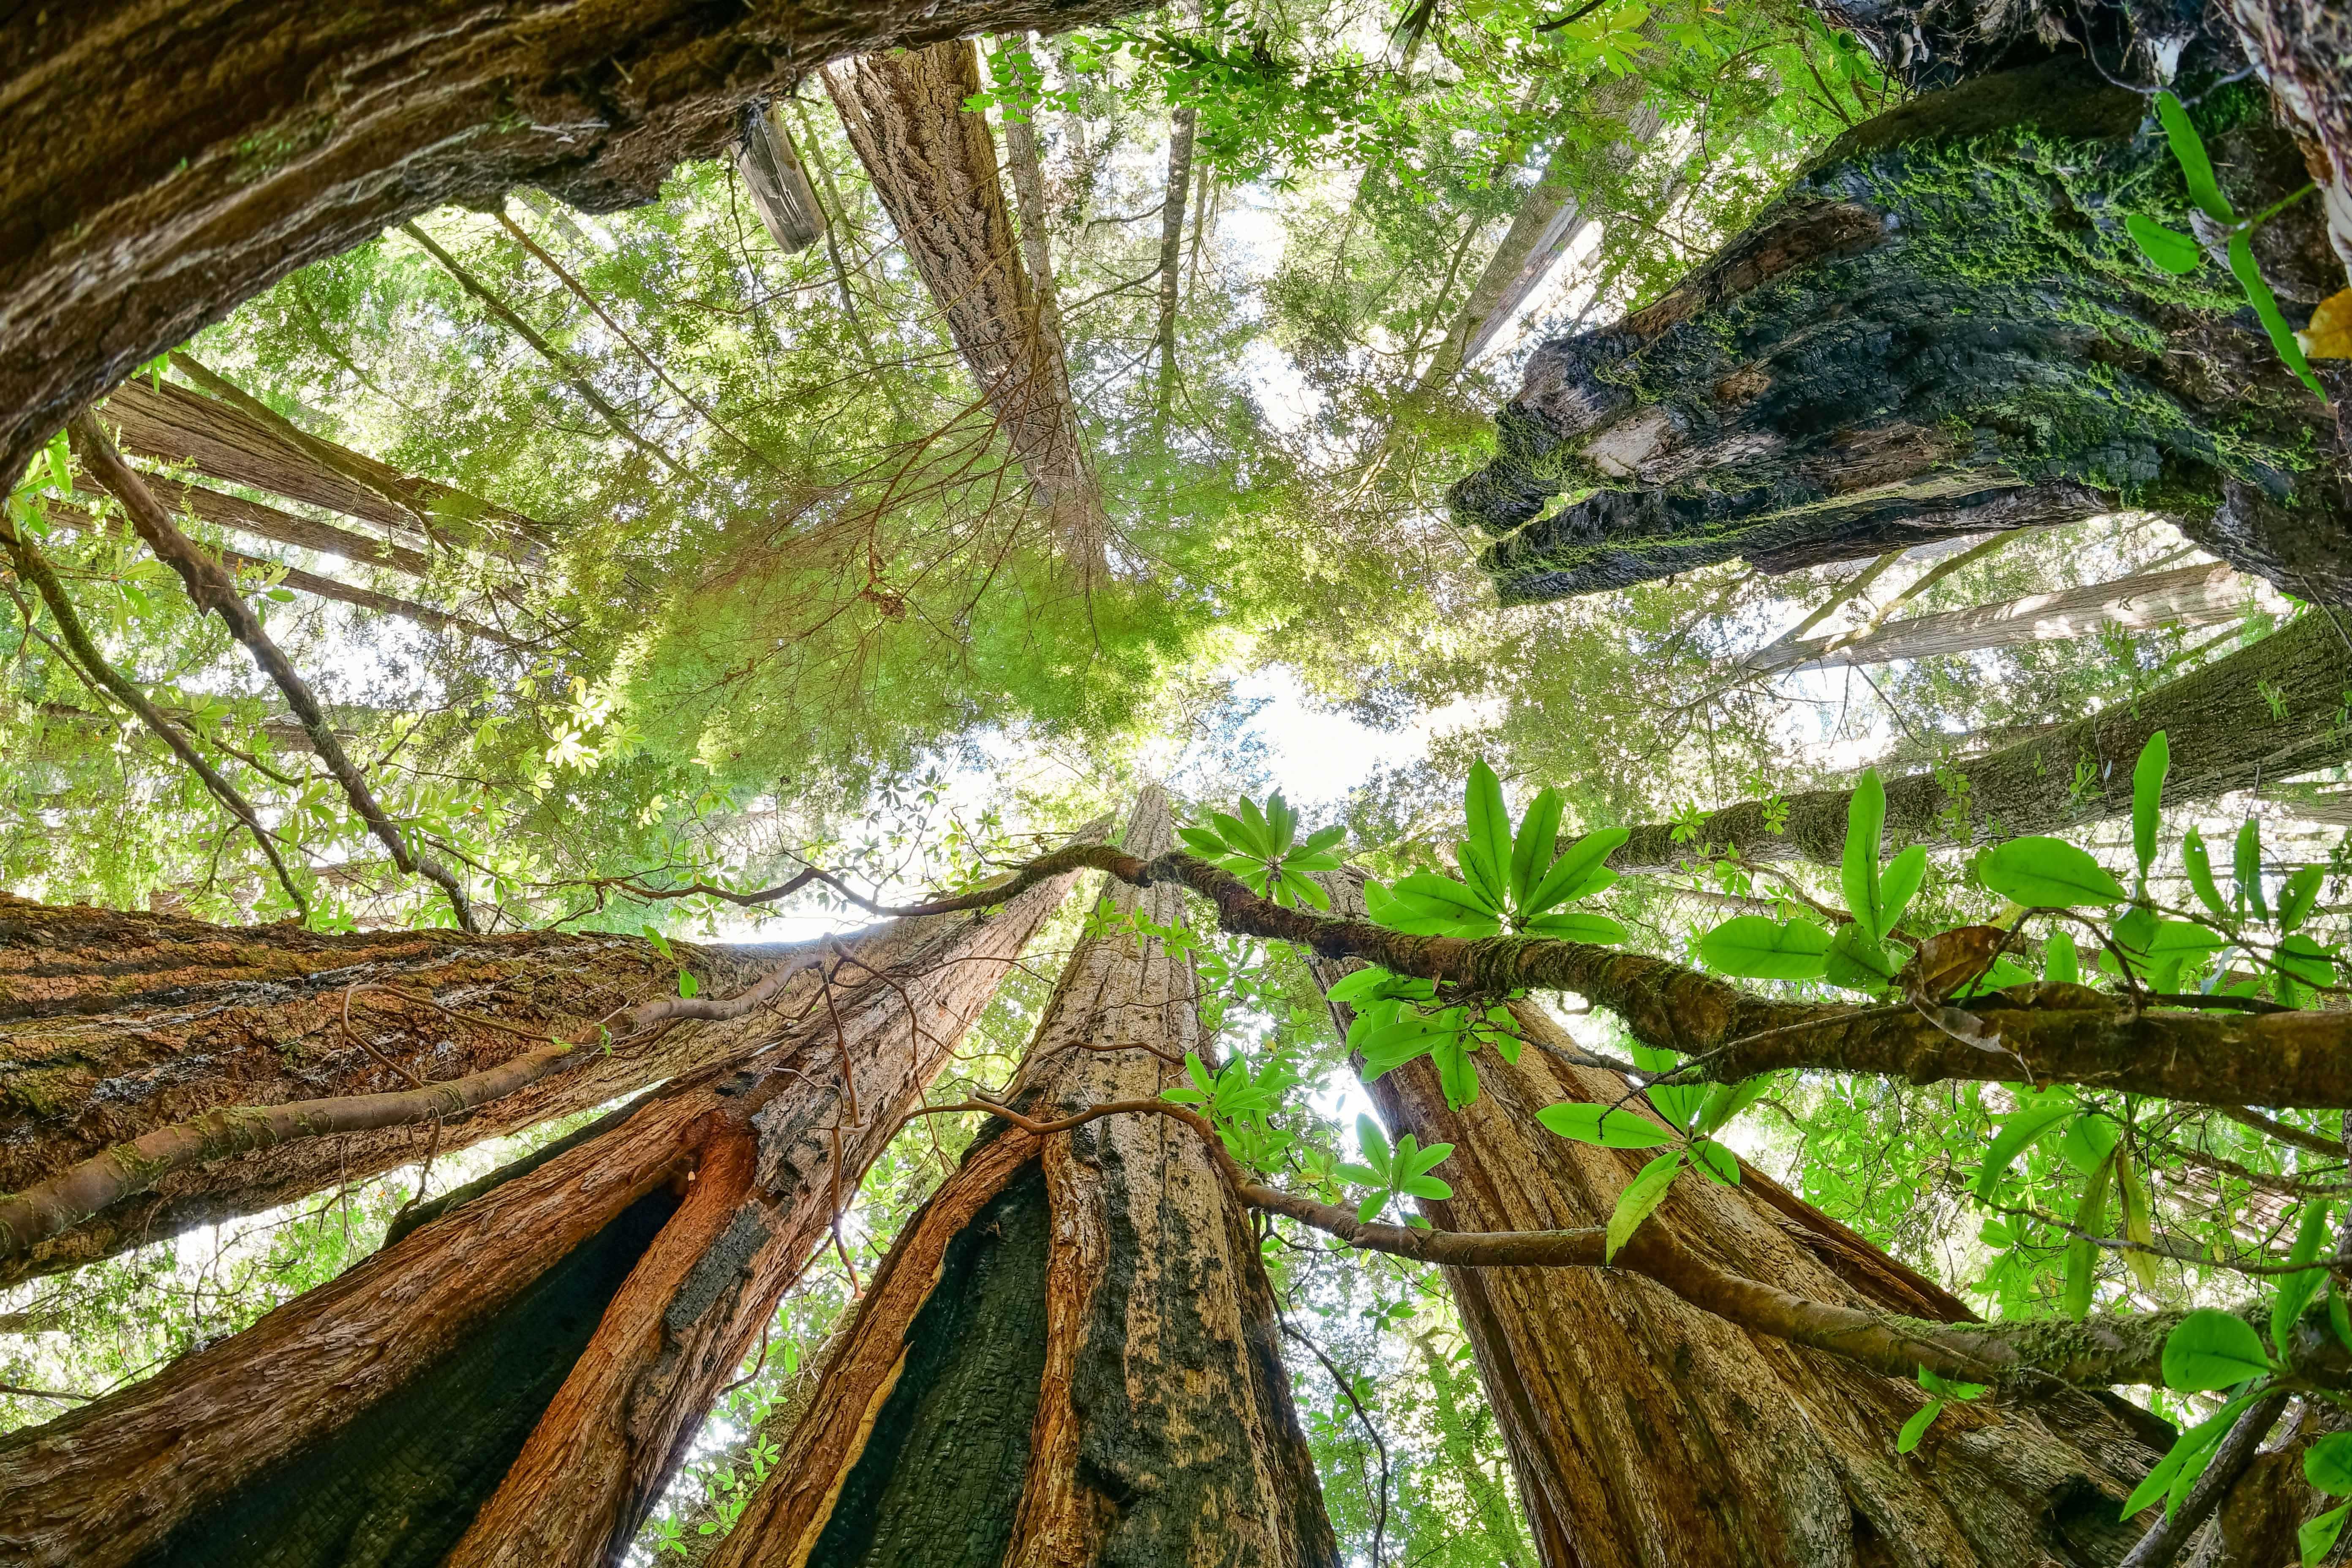 A circle of redwood trees with black fire scars.